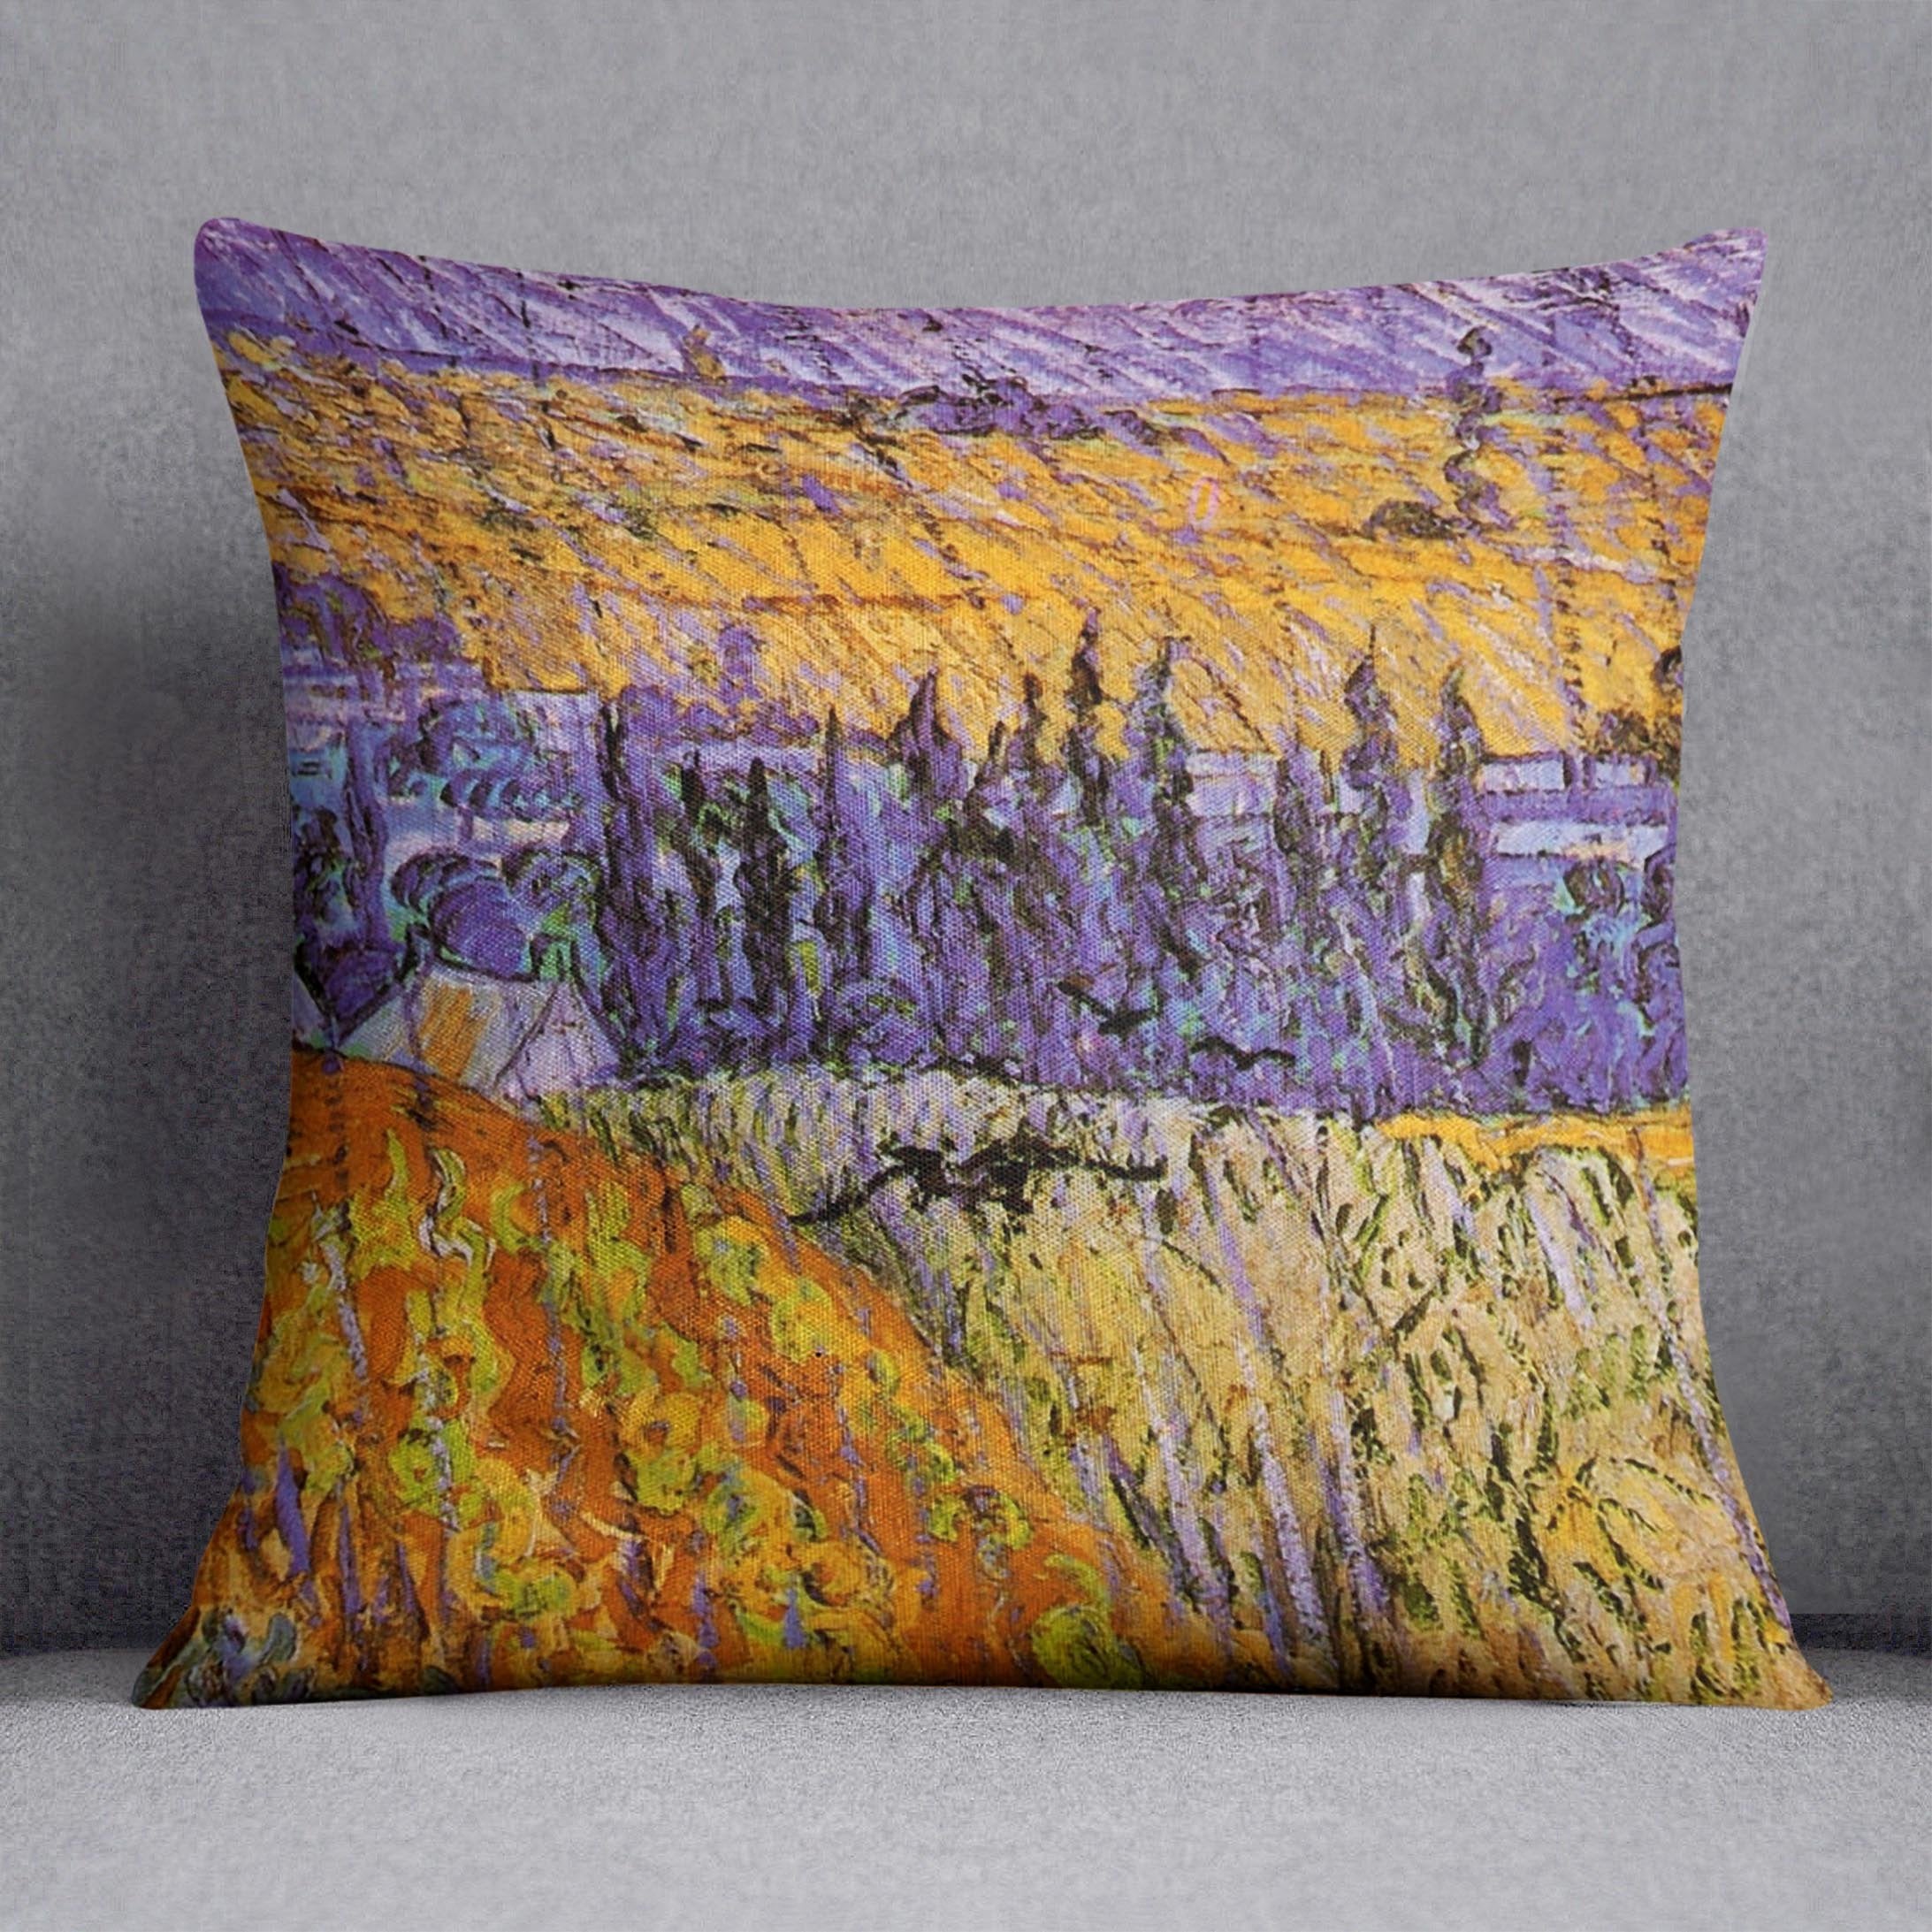 Landscape at Auvers in the Rain by Van Gogh Throw Pillow